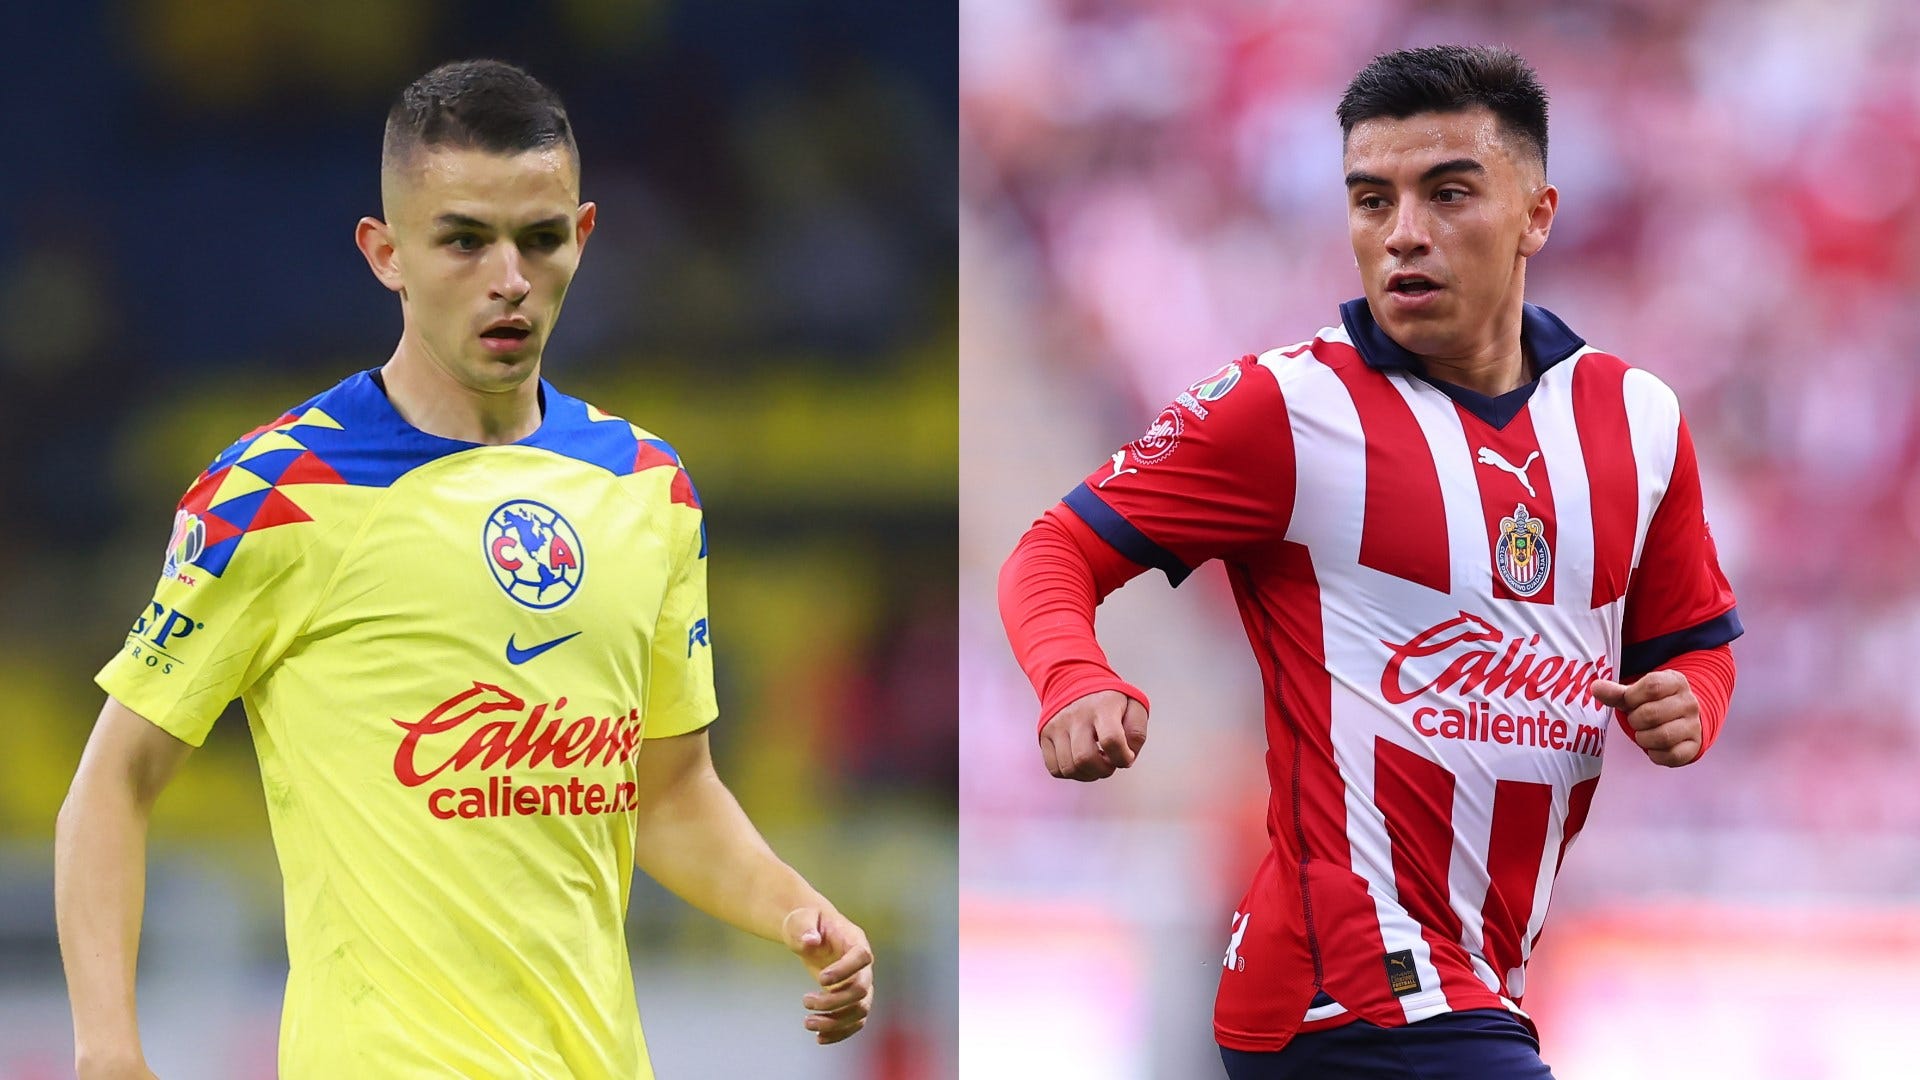 Club America vs Chivas Live stream, TV channel, kick-off time and where to watch Goal US